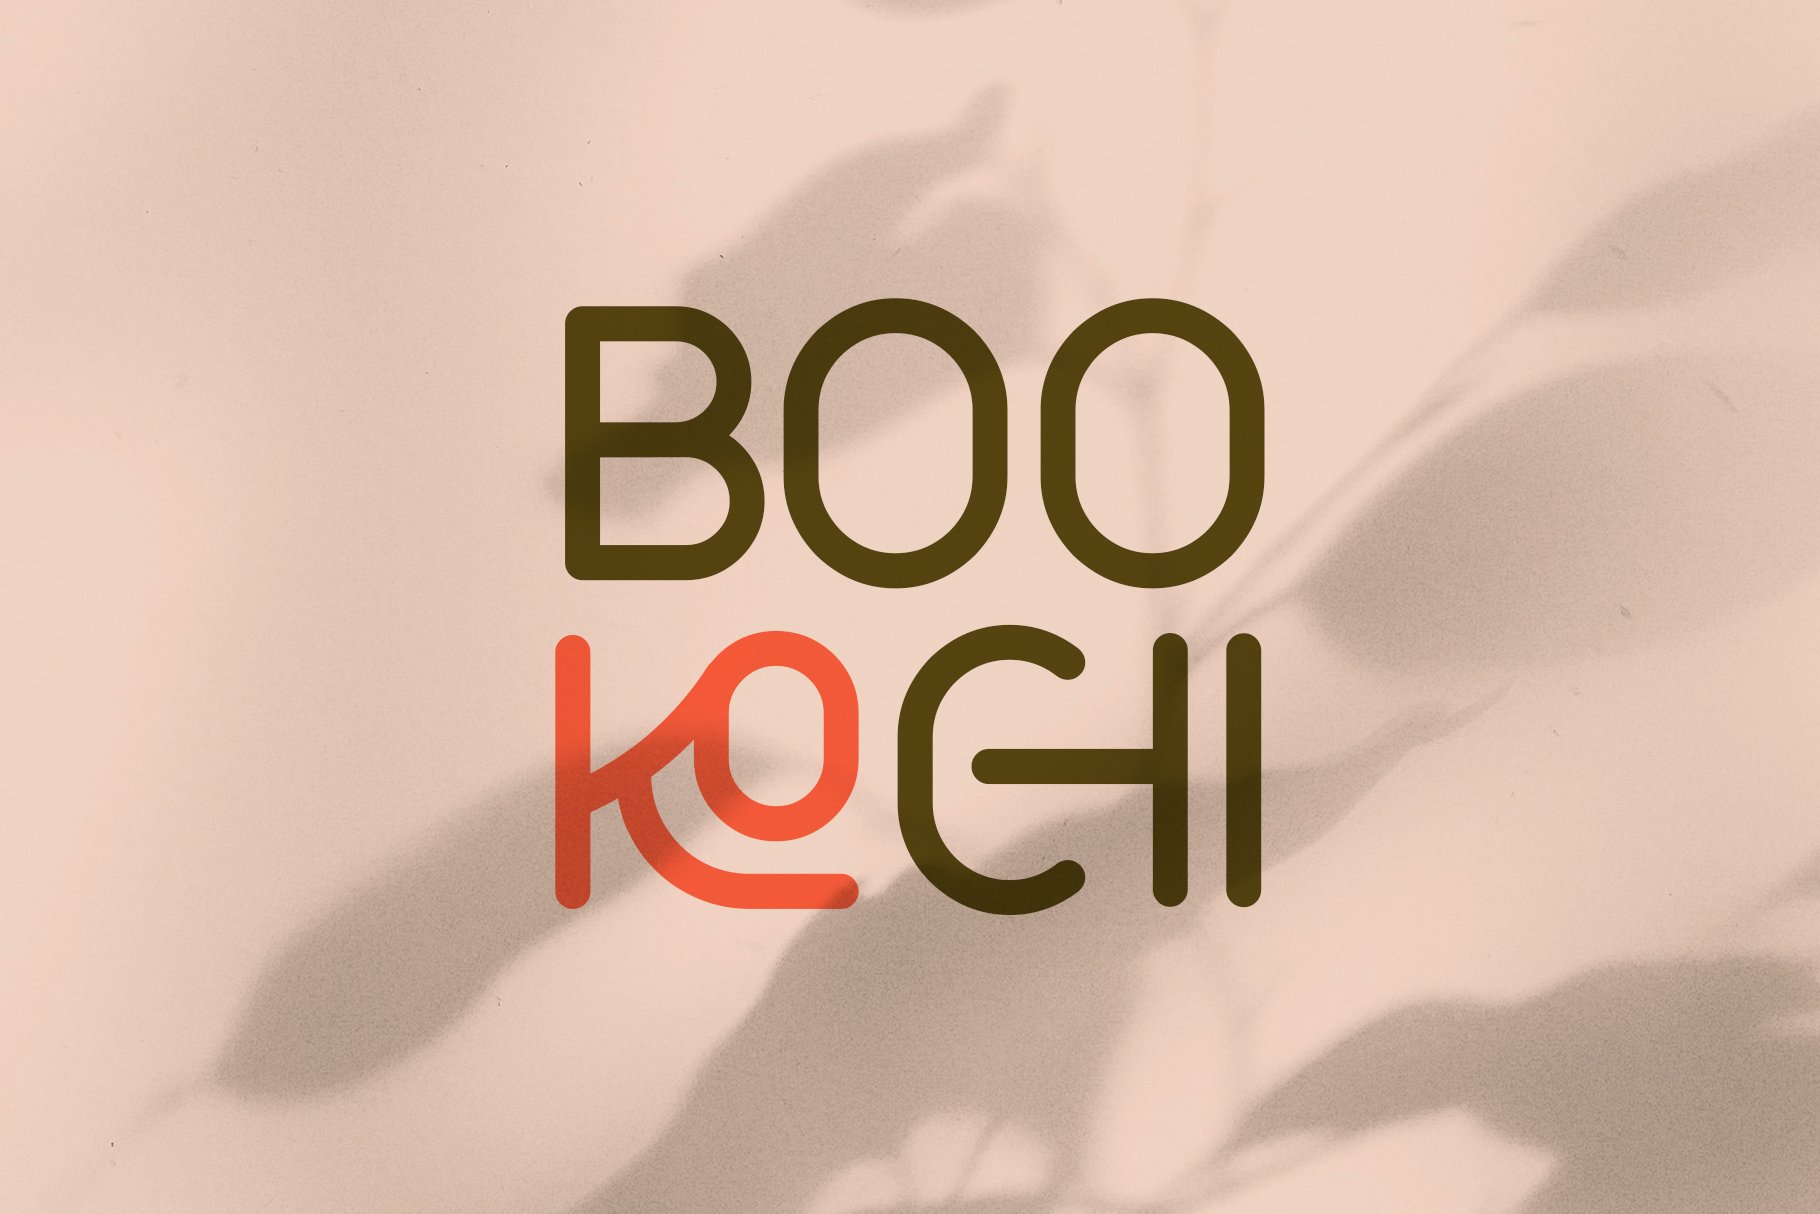 Bookochi Rounded Display Sans Serif cover image.